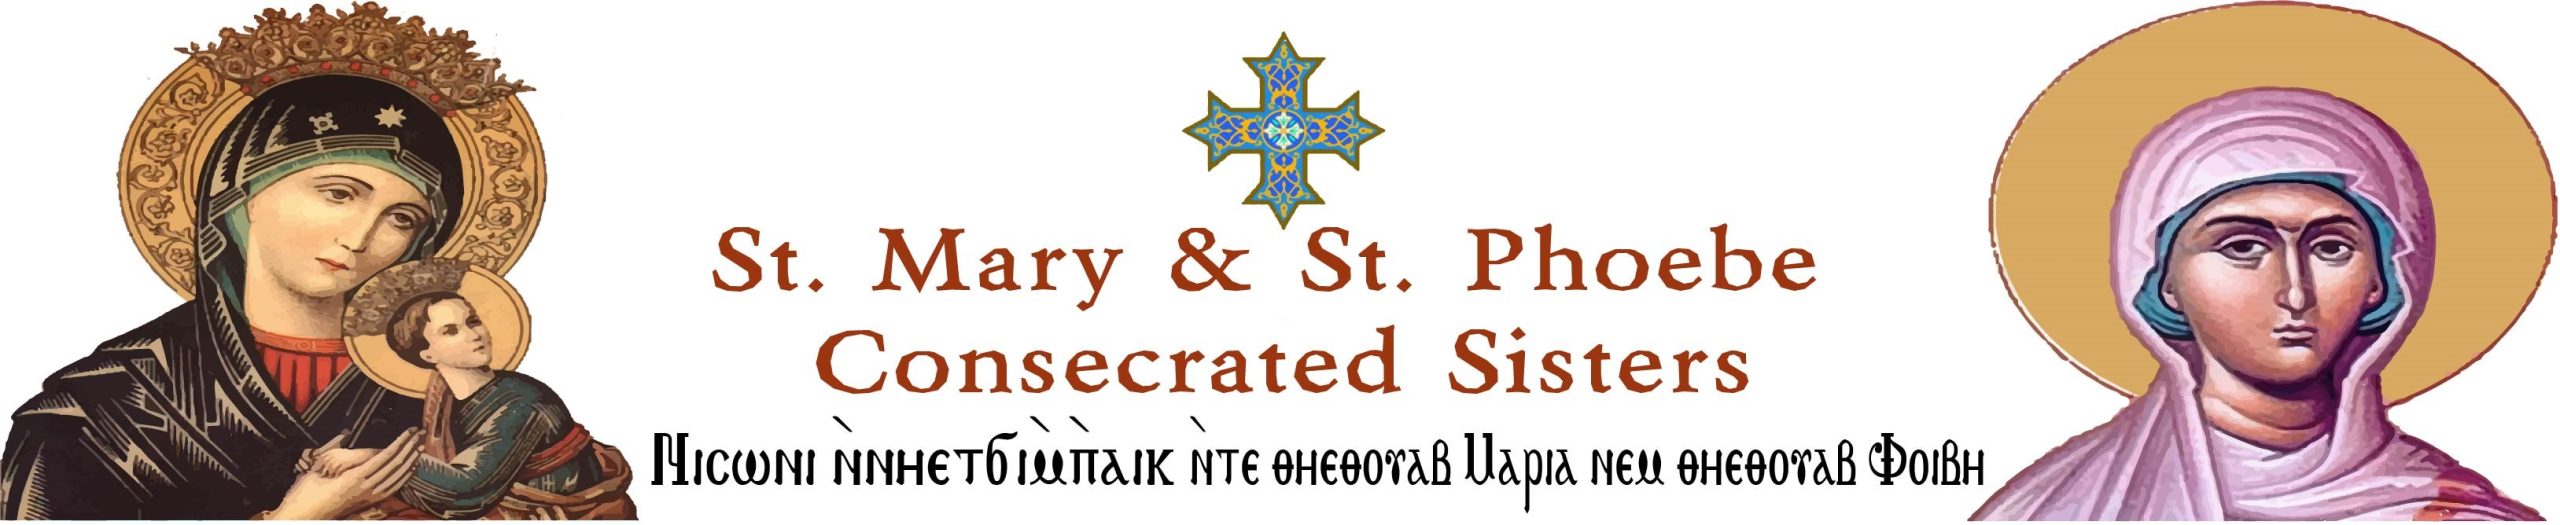 St. Mary and St. Phoebe Consecrated Sisters Logo